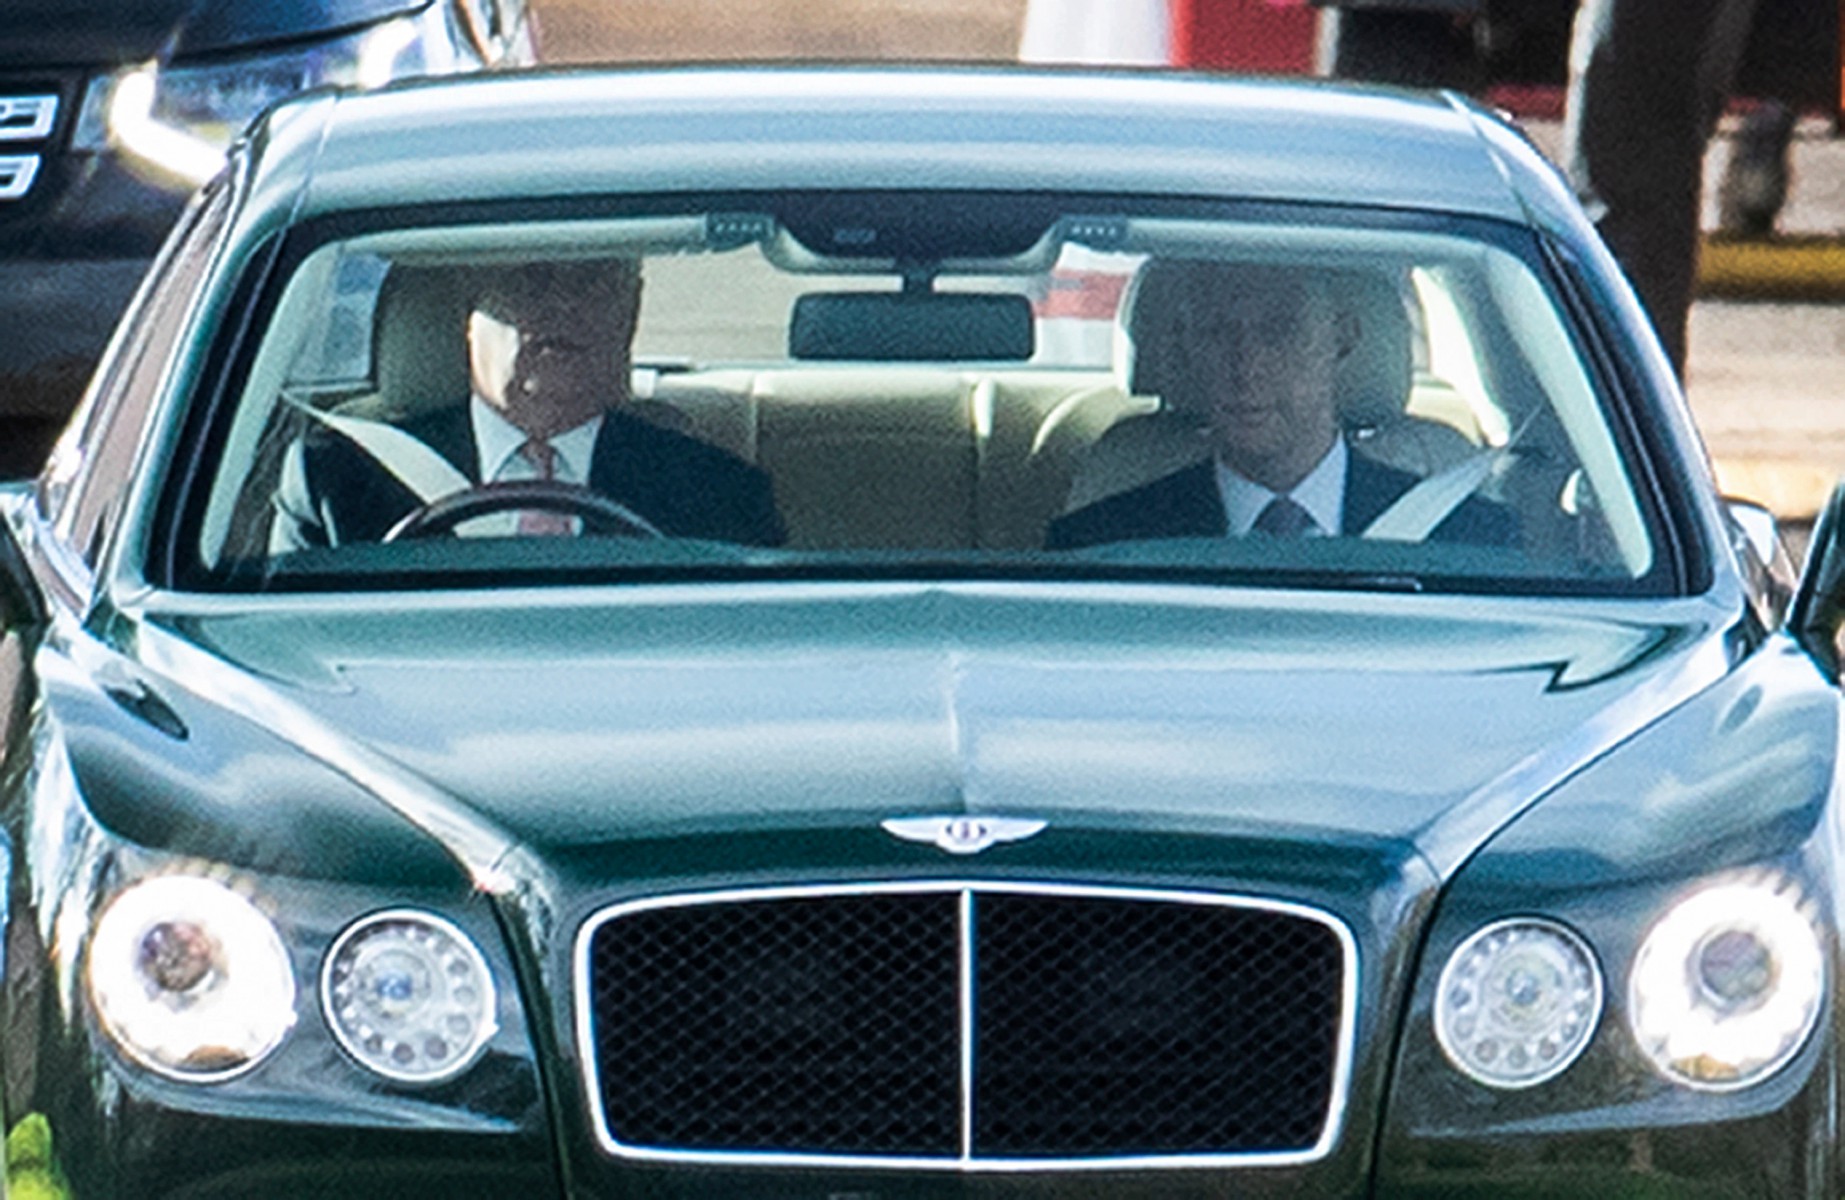 Prince Andrew is seen driving from Windsor